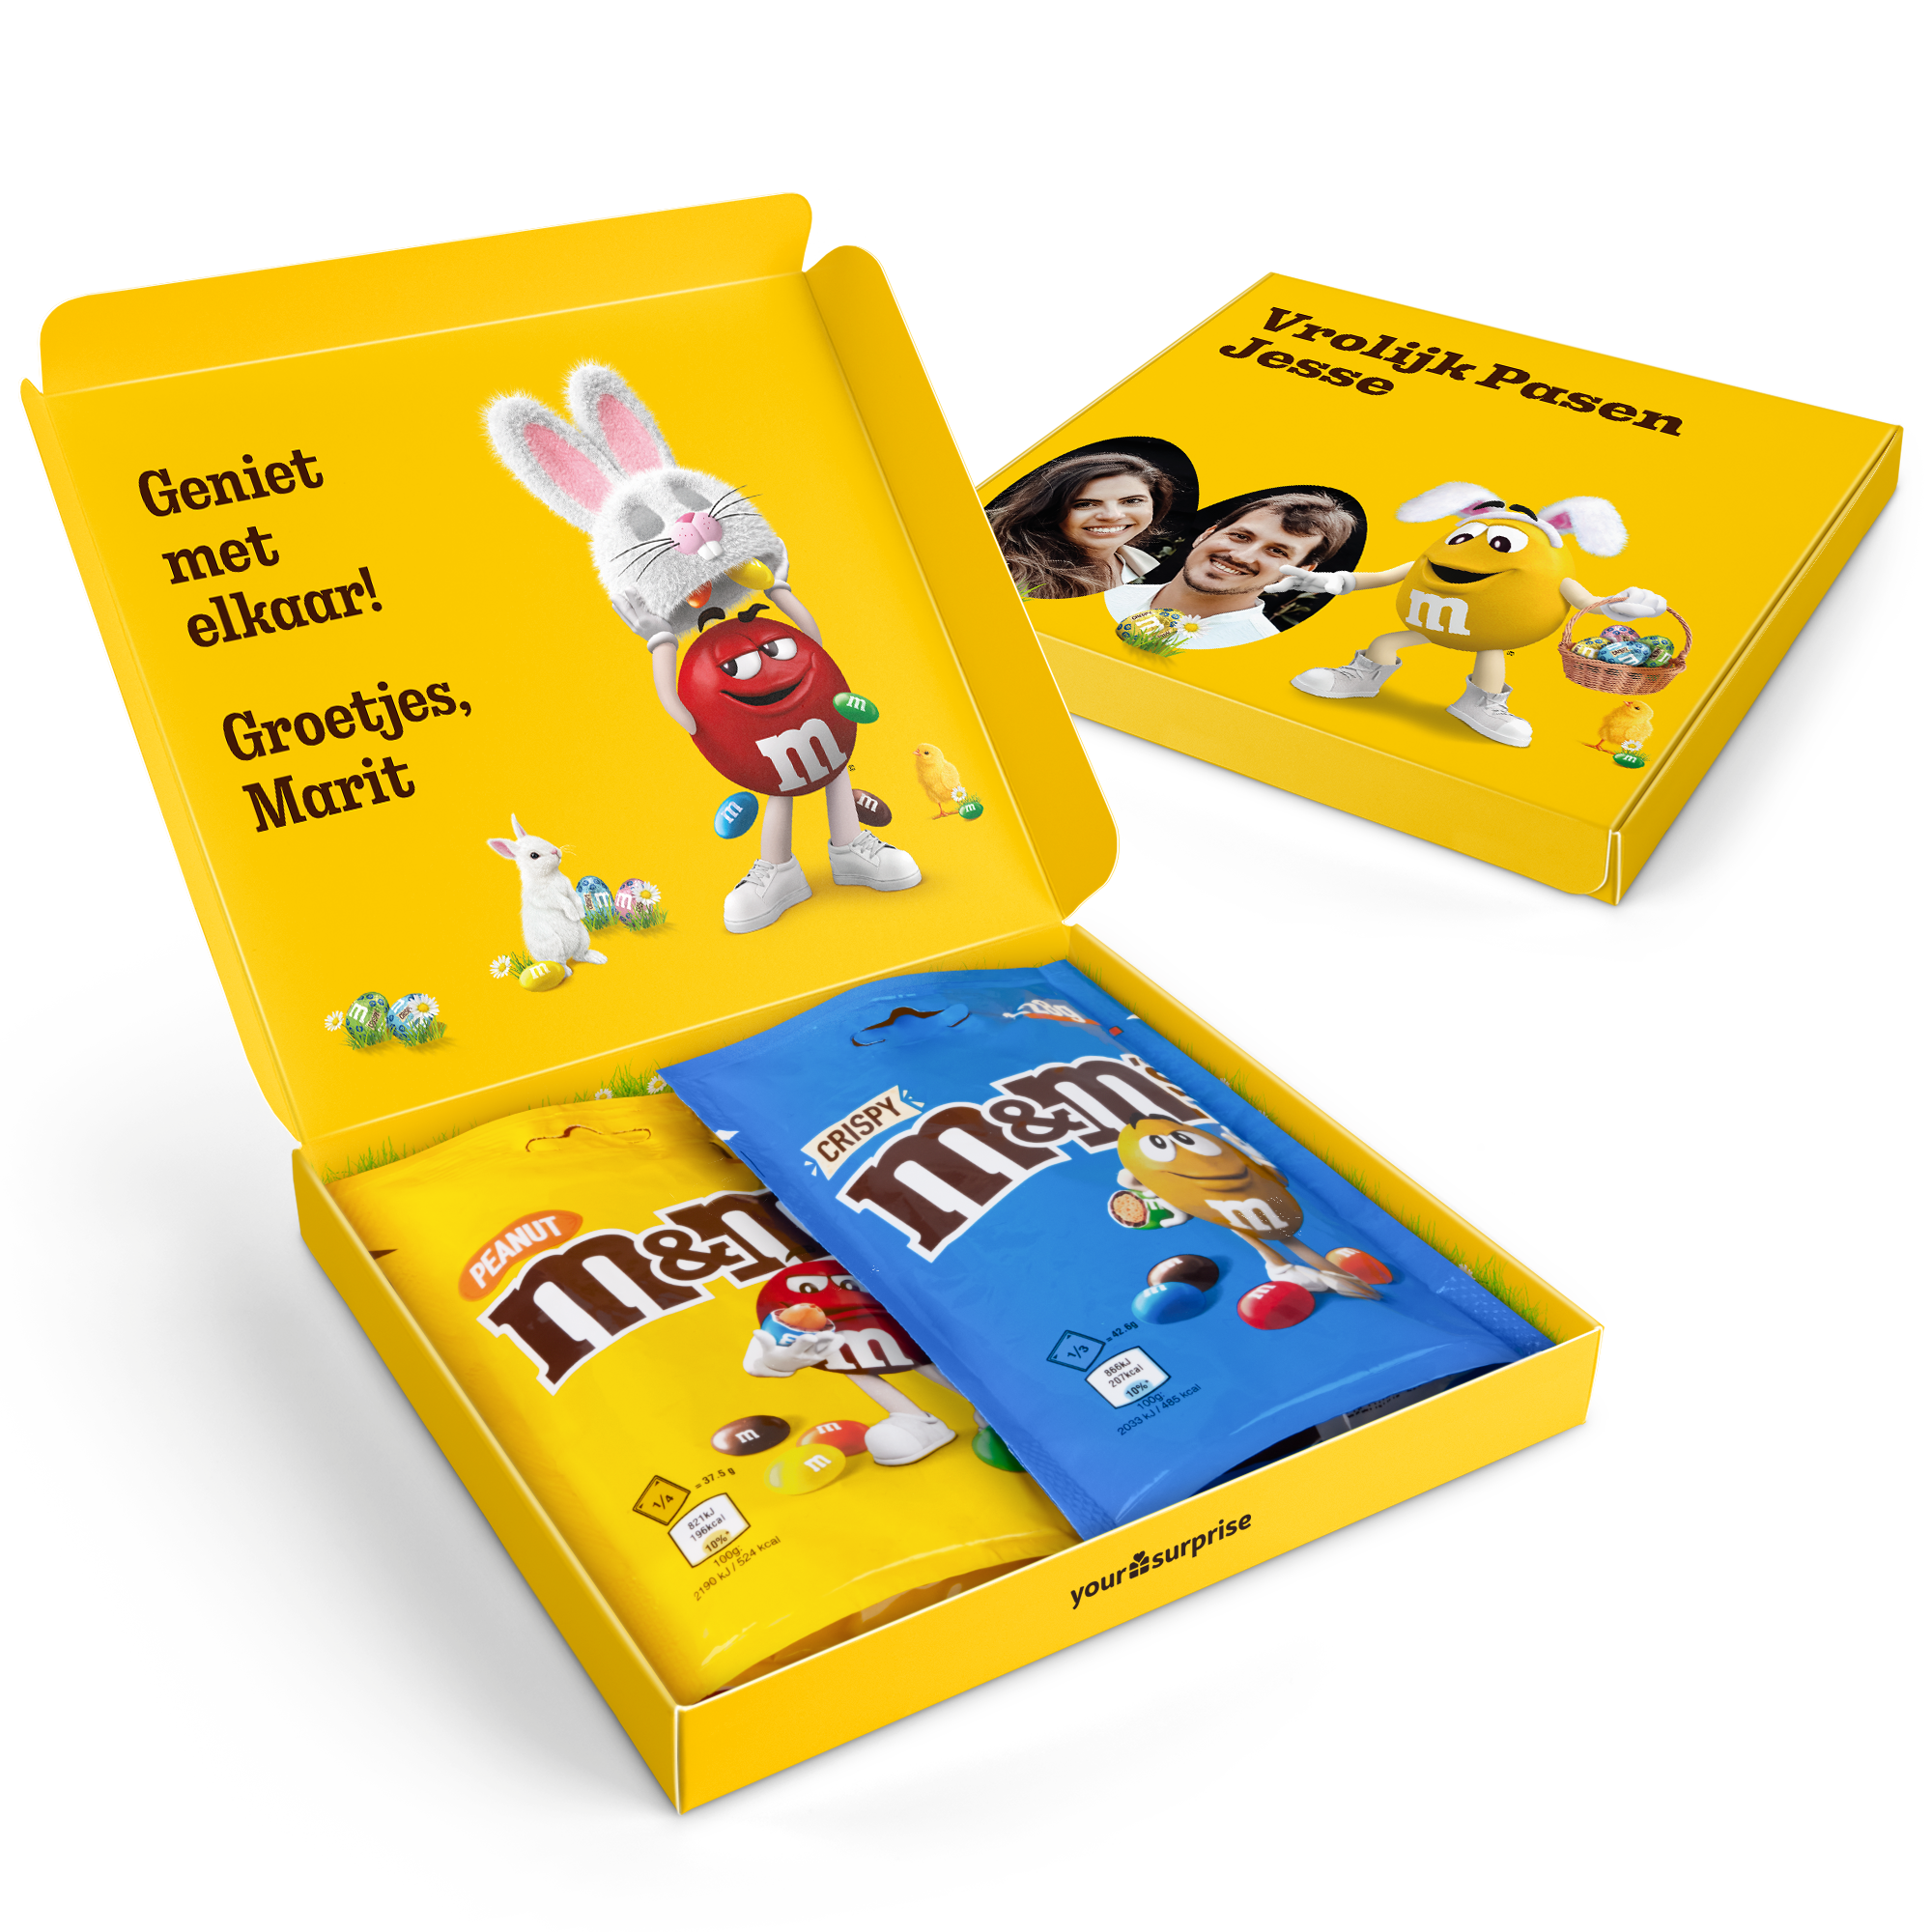 M&M's giftbox branded